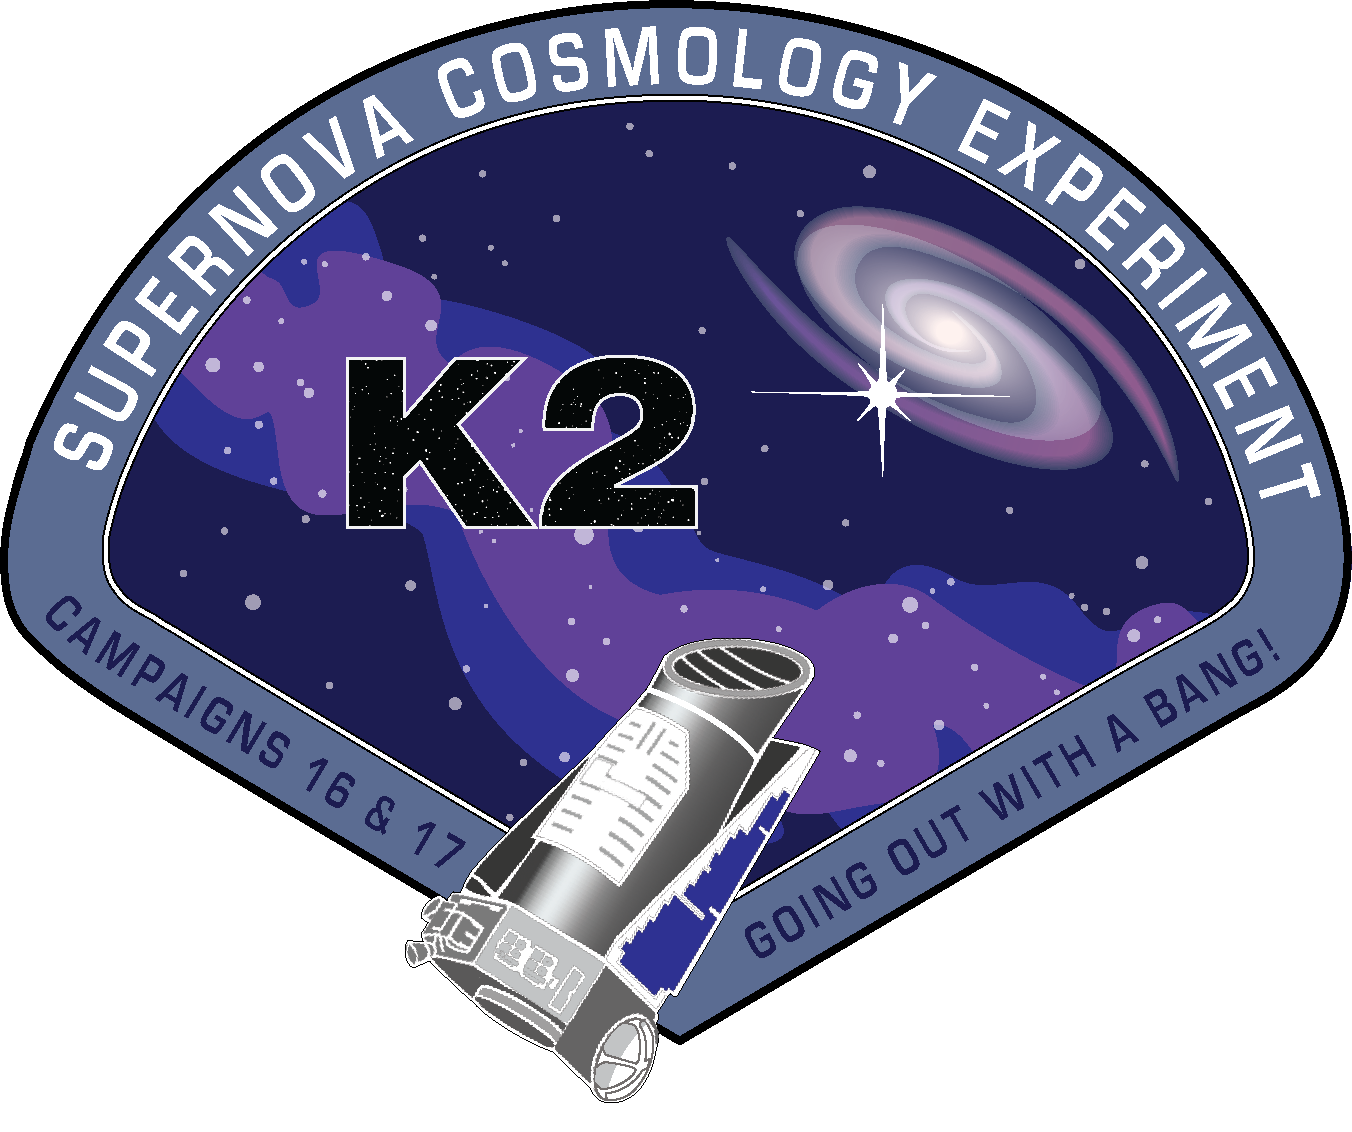 The Kepler satellite ends it's career with at bang! New knowledge on Type Ia supernovae. Logo: NASA Keplerscience.